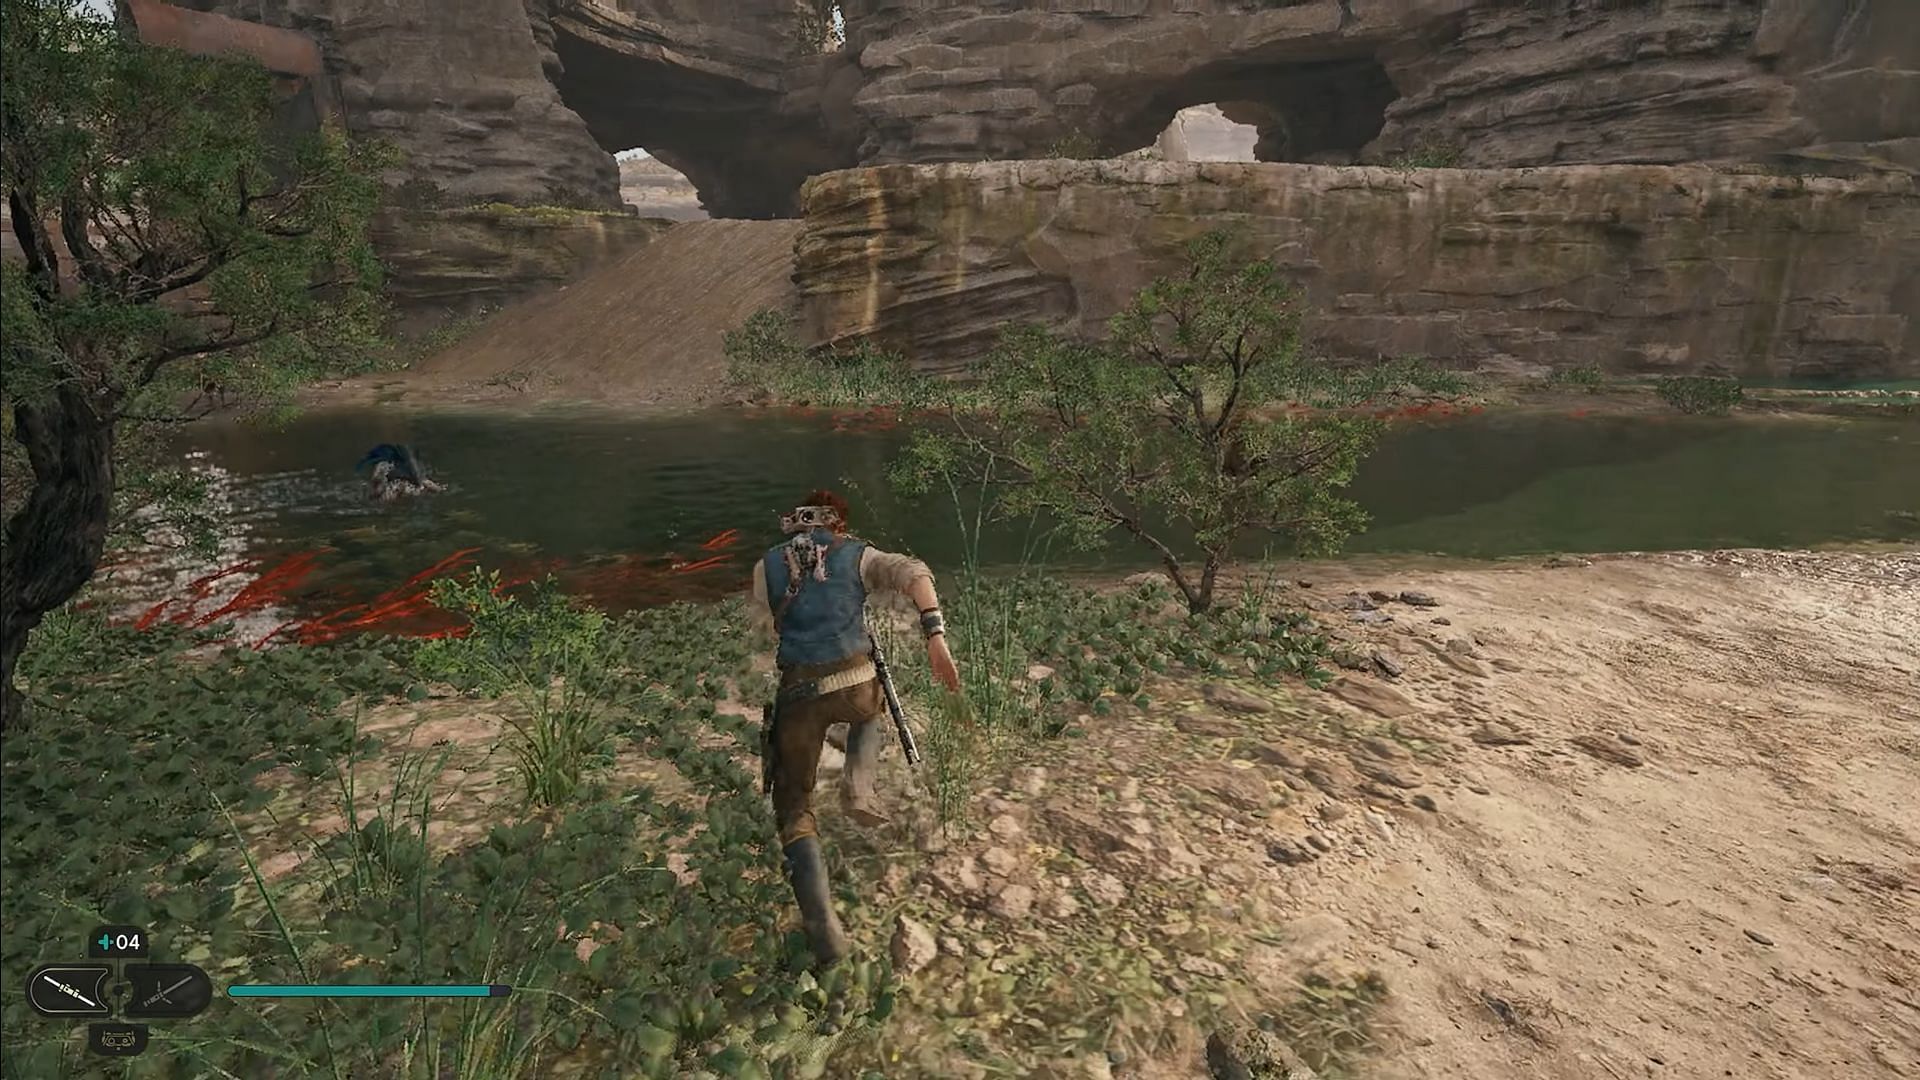 Seed Pods #1-3 Location in Riverbed Watch Region (via RESPAWN)